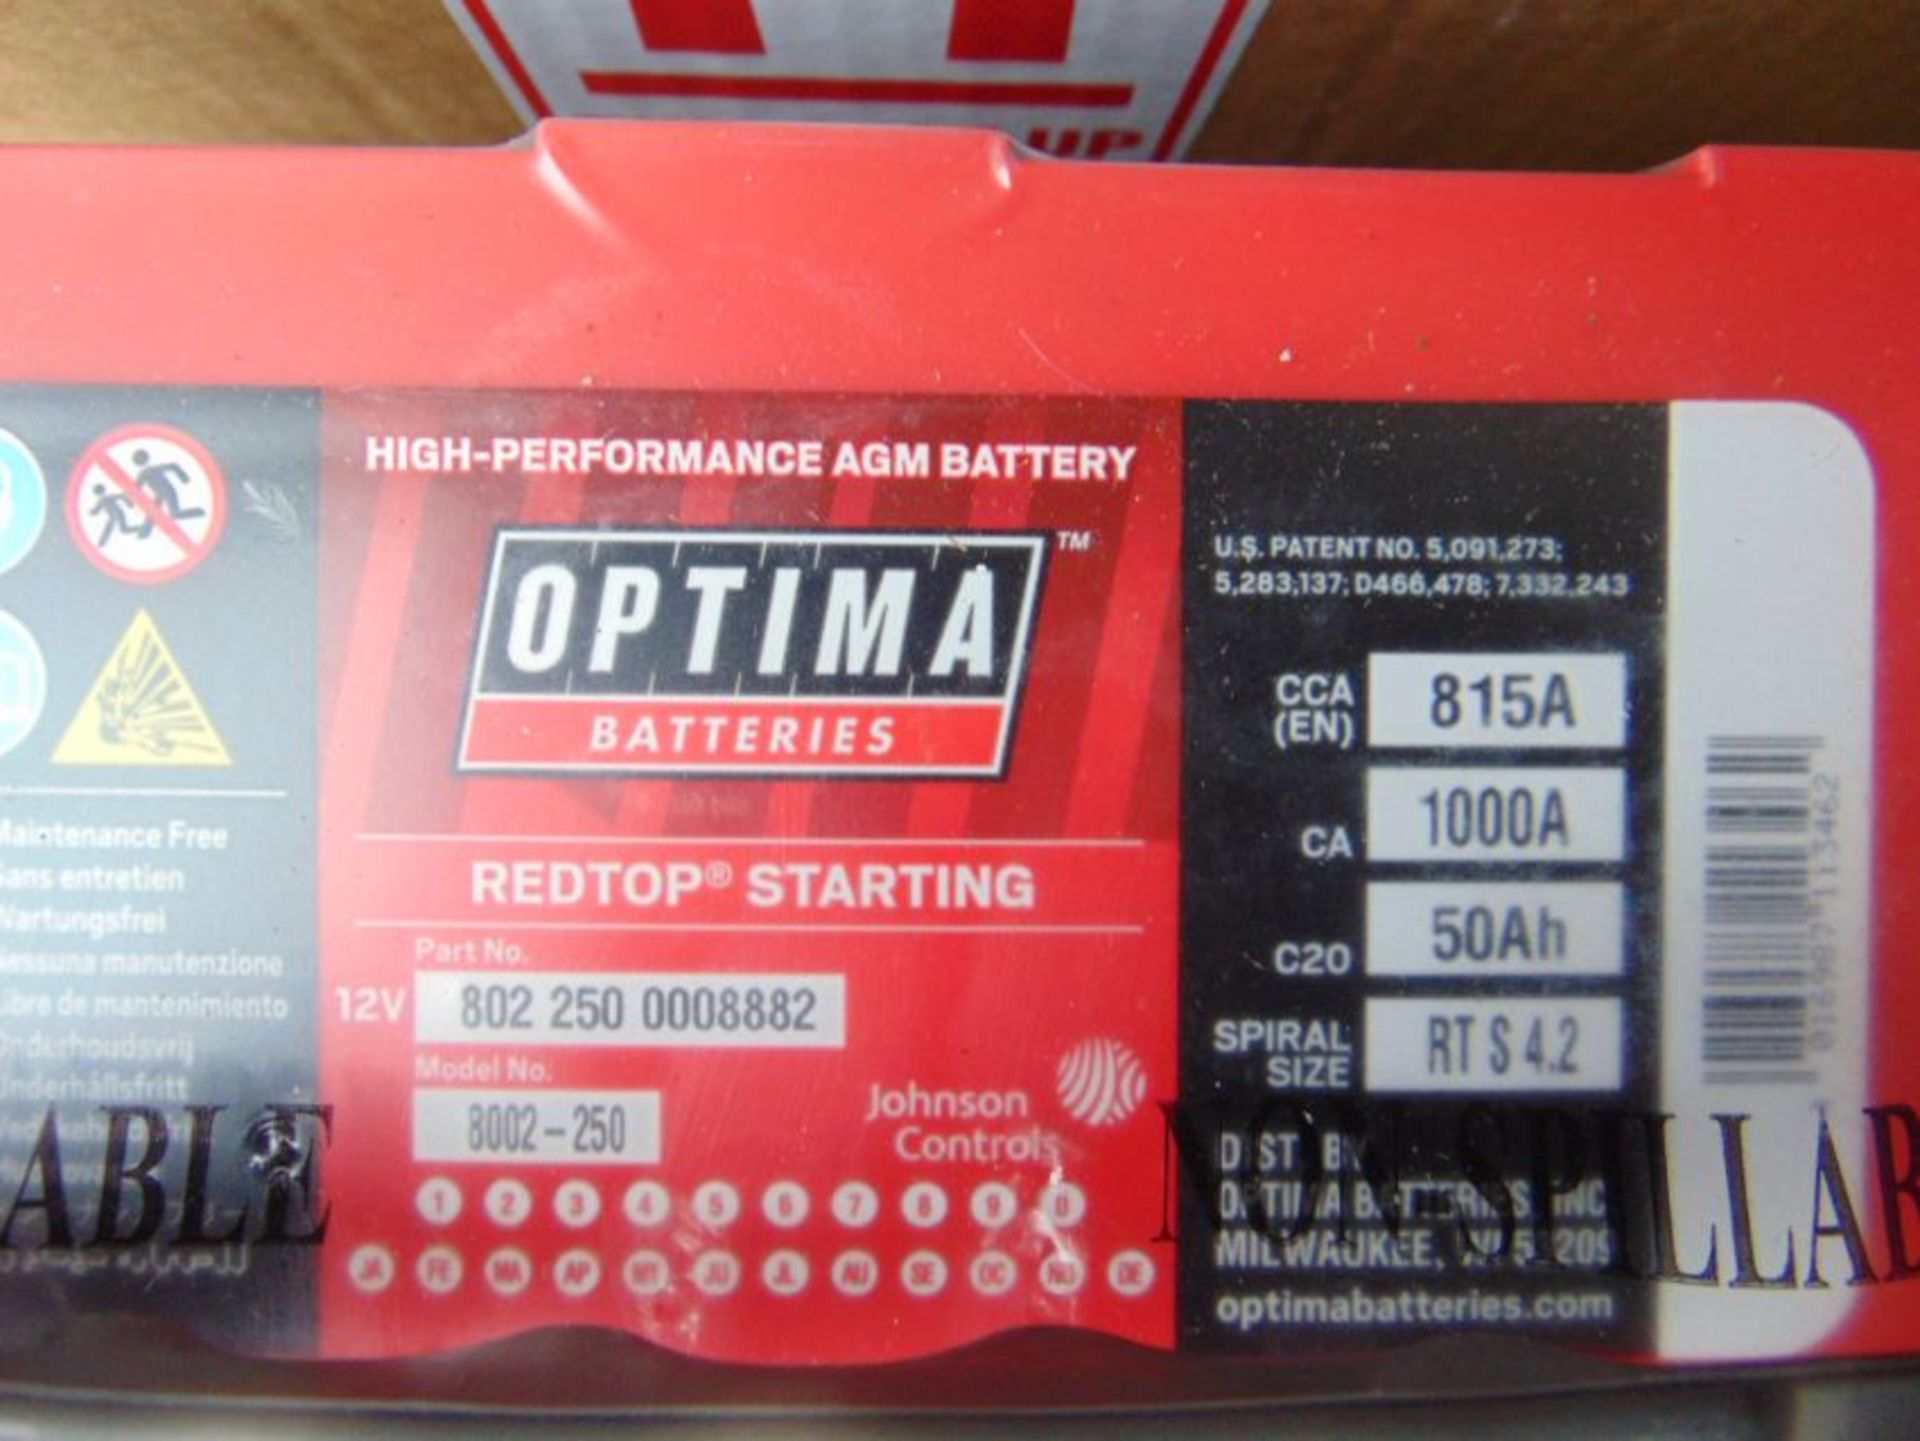 2 x Unissued RTS 4.2 Optima Red Top 12v Starting Batteries – (8002-250) RTS4.2 AGM - Image 3 of 3